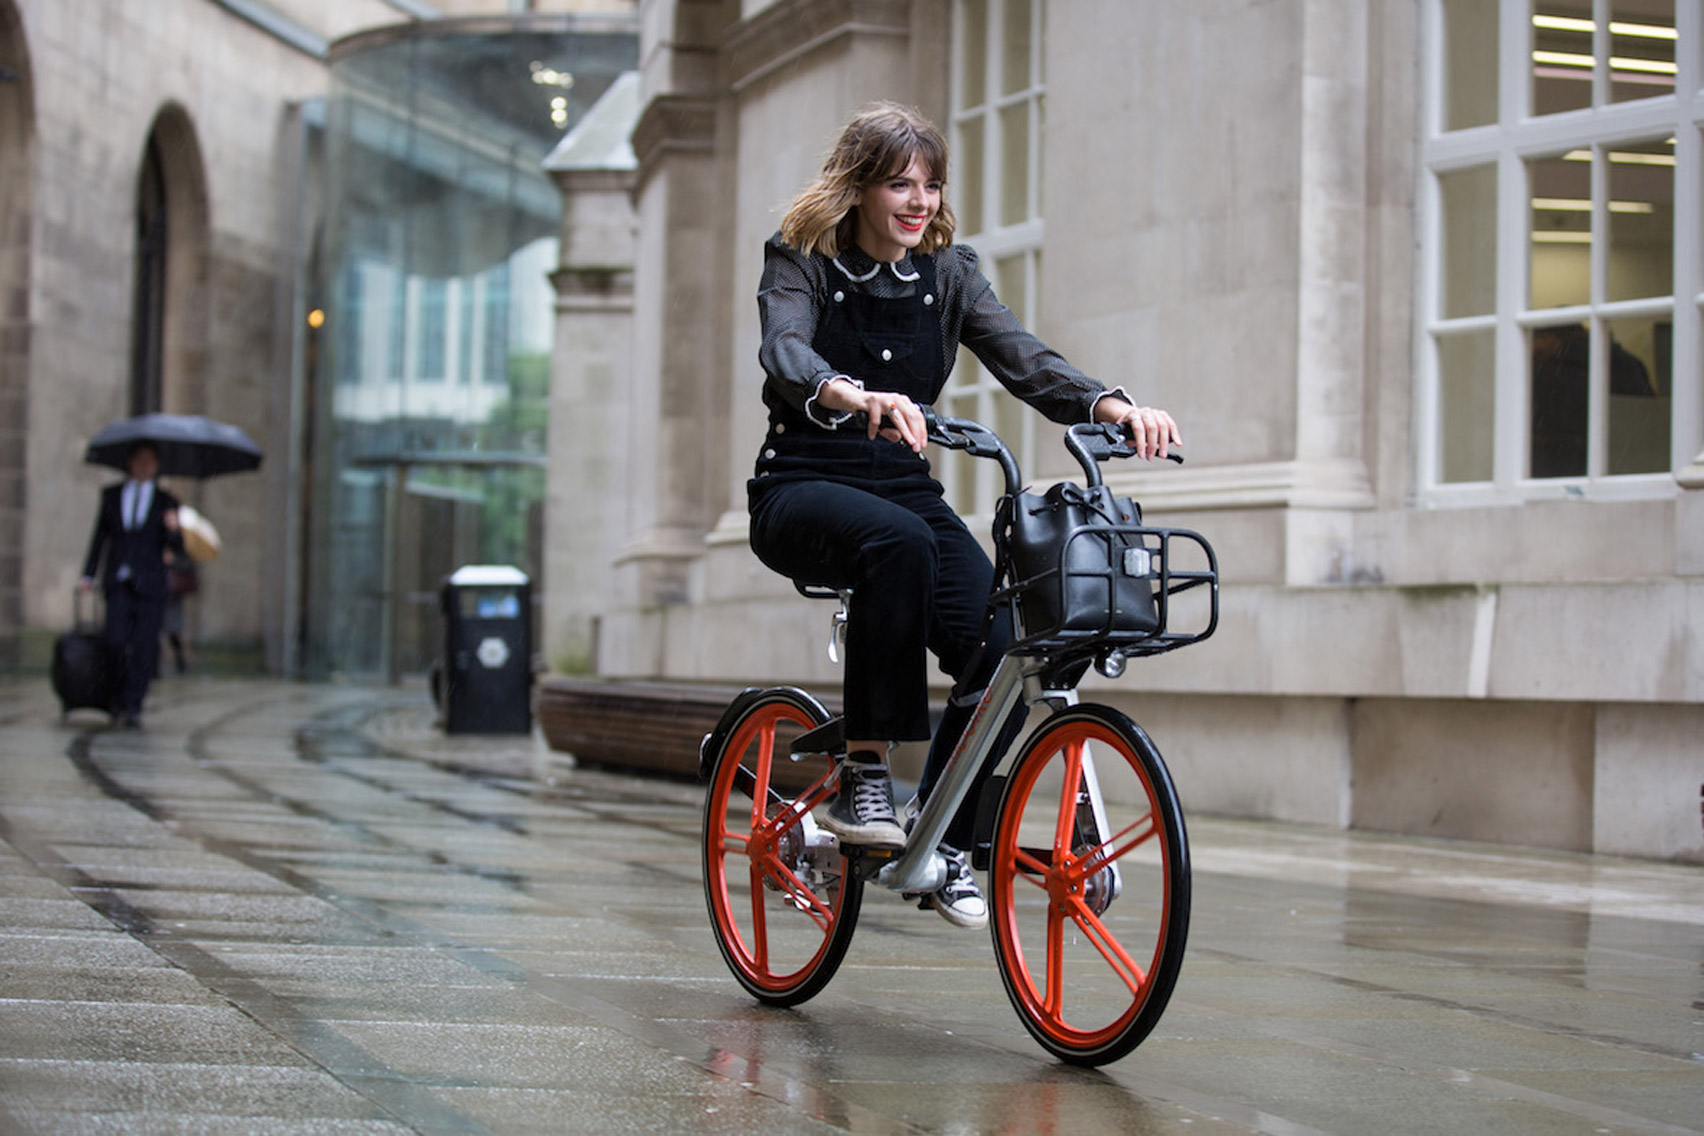 Bike-sharing company Mobike withdraws from Manchester due to vandalism